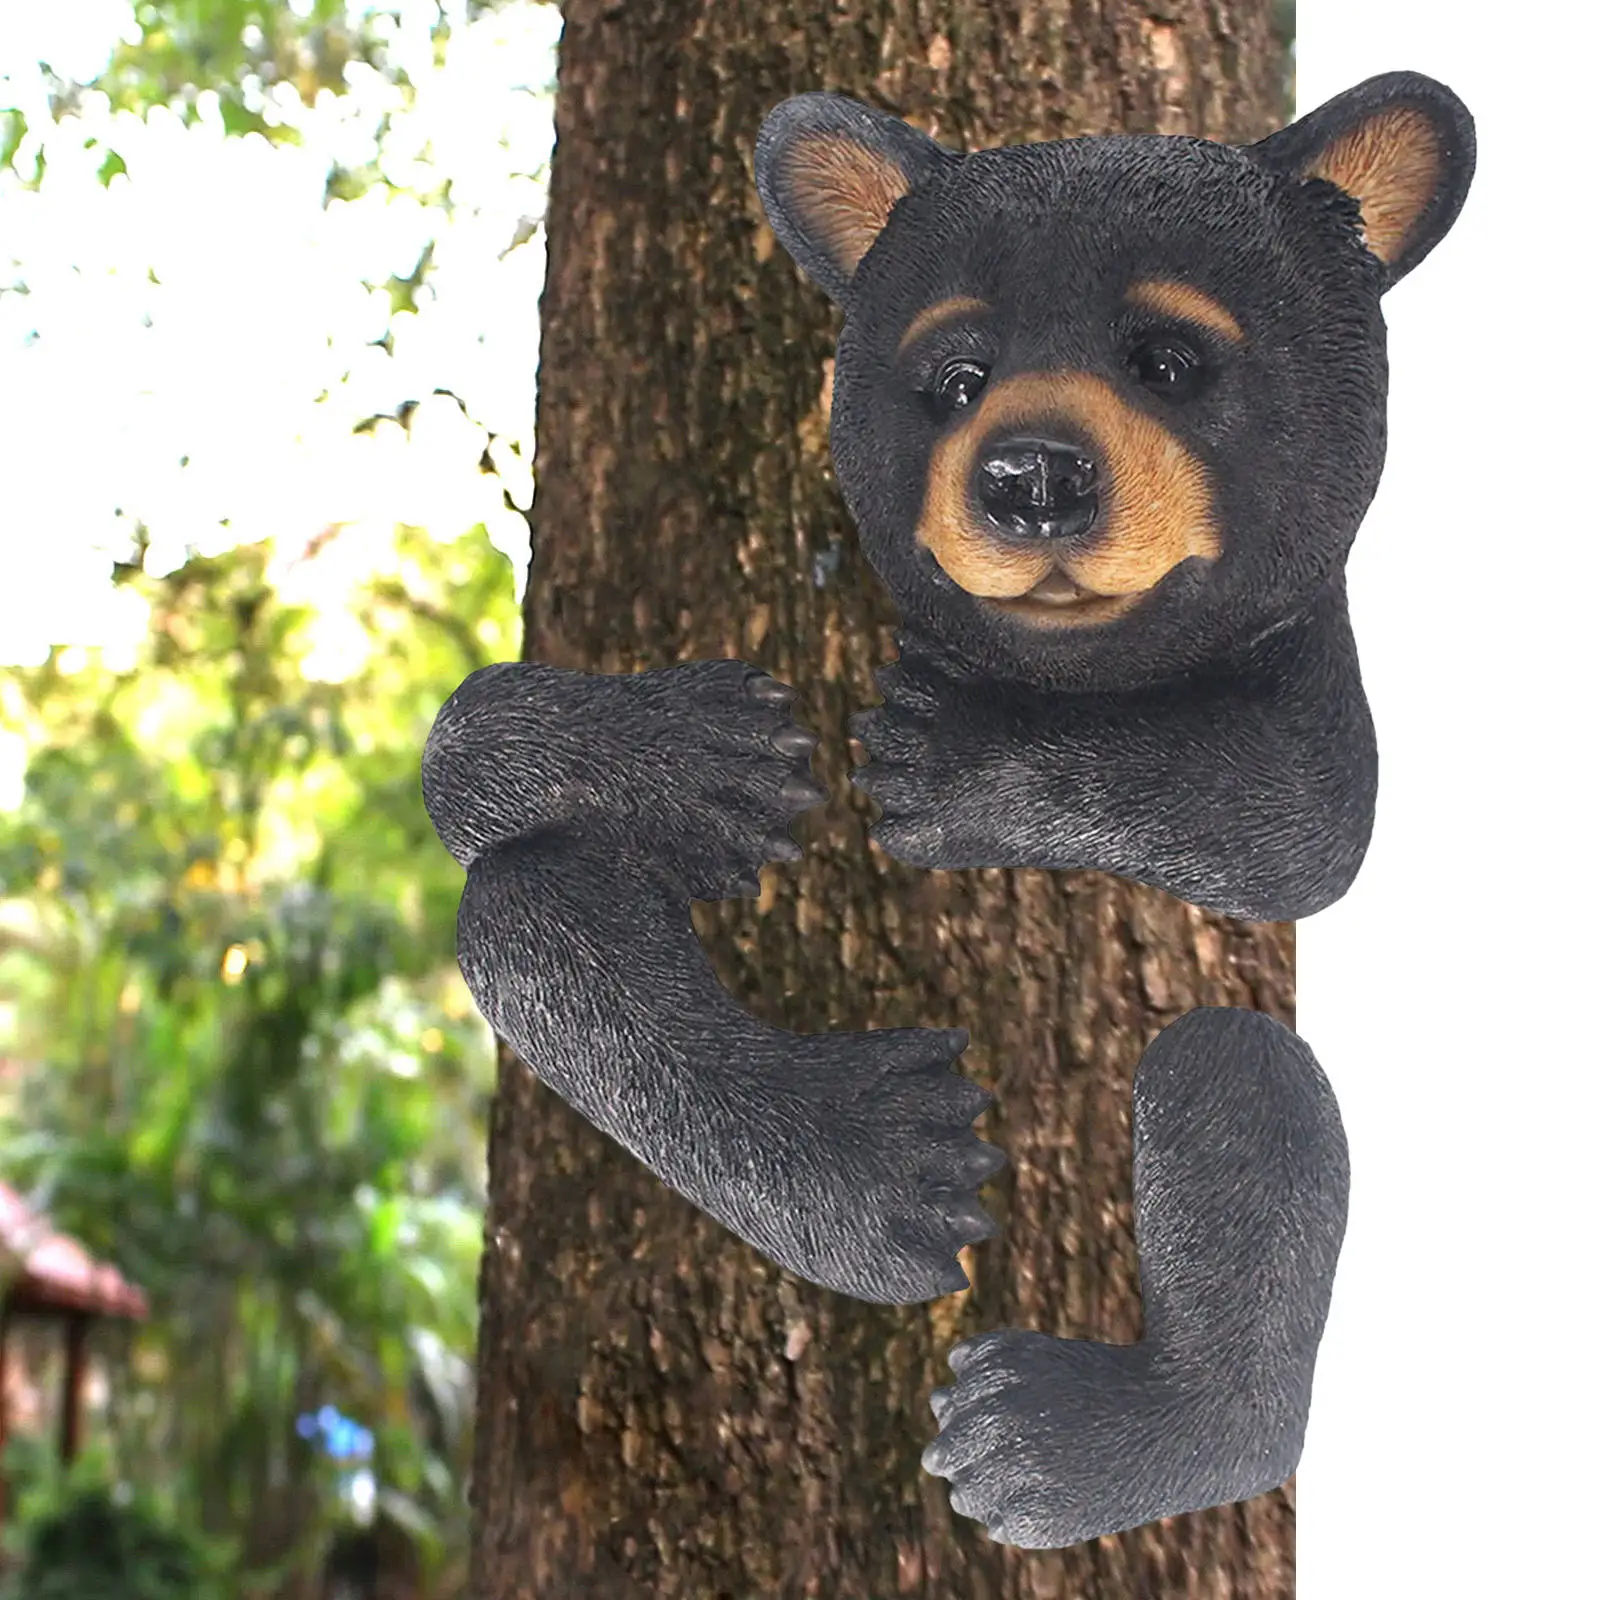 Black Bear Tree Hugger Creative Nature Lovers Gifts Home Garden Decorations Crafts